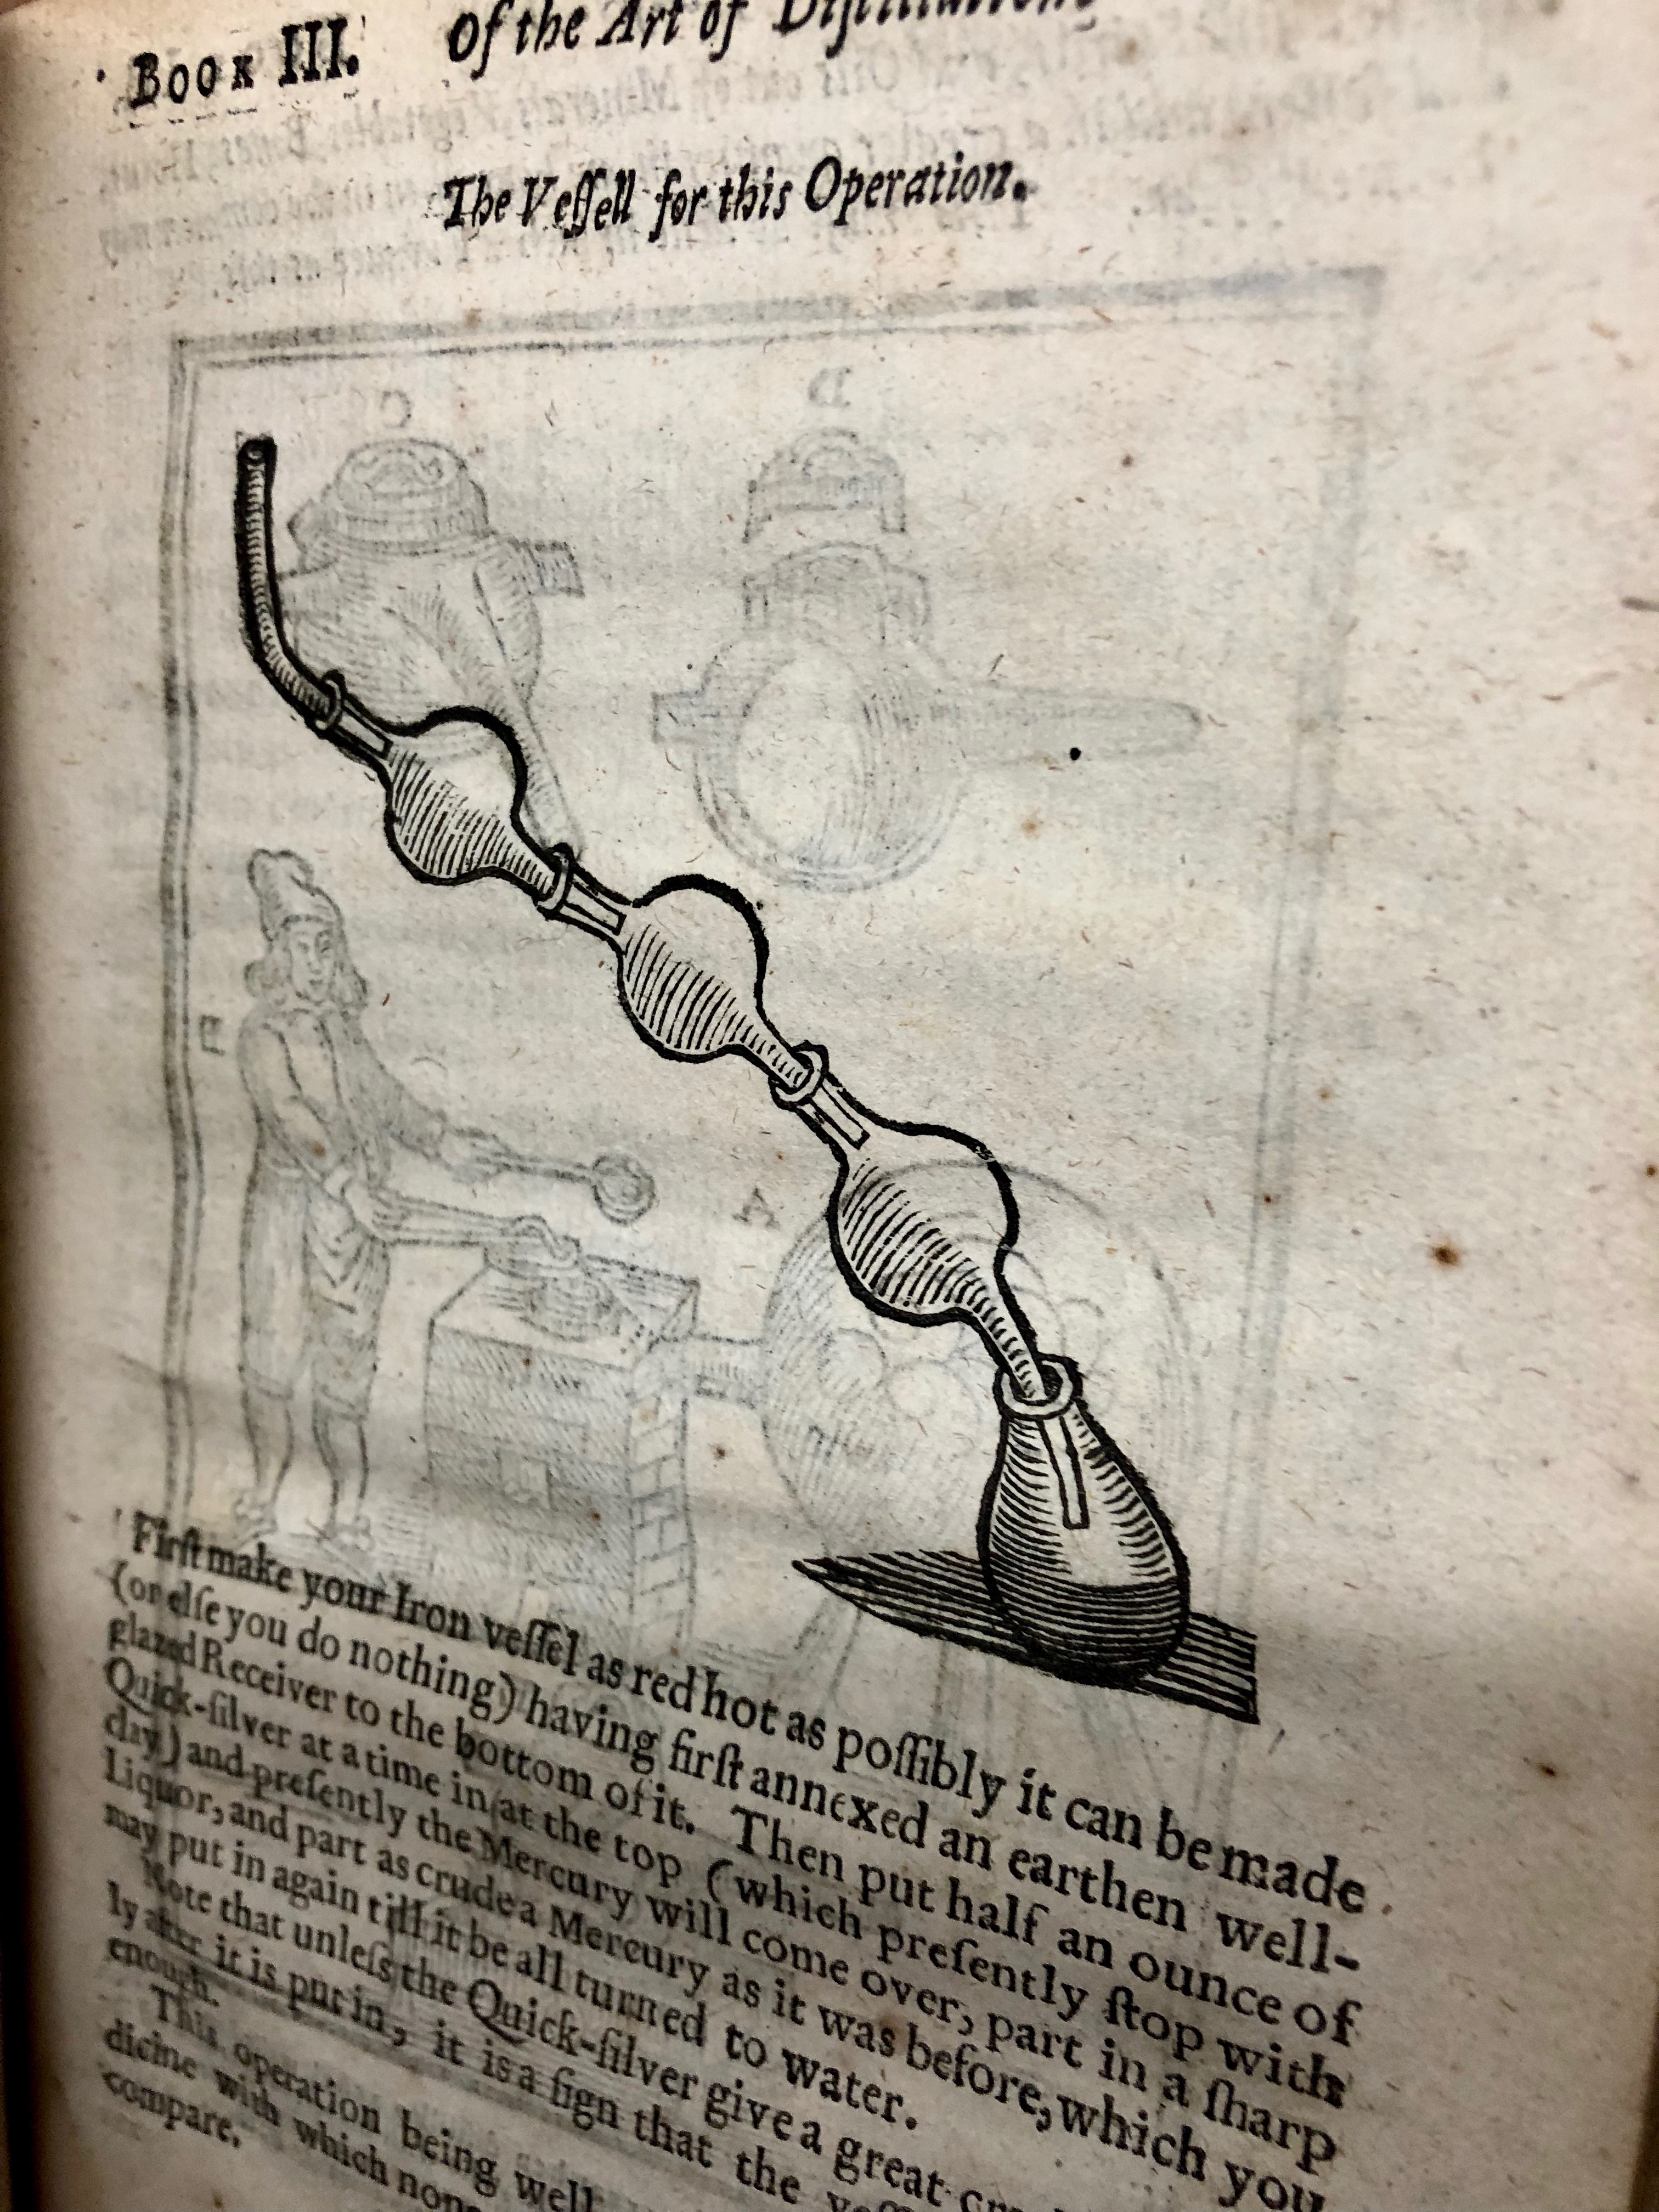 Diagram from ' The art of distillation : or, a treatise of the choicest spagiricall preparations ... furnaces & vessels ... experiments and curiosities ...anatomy of gold and silver' by John French, 1653, London. (Maddison Collection 2A25, F10505800)